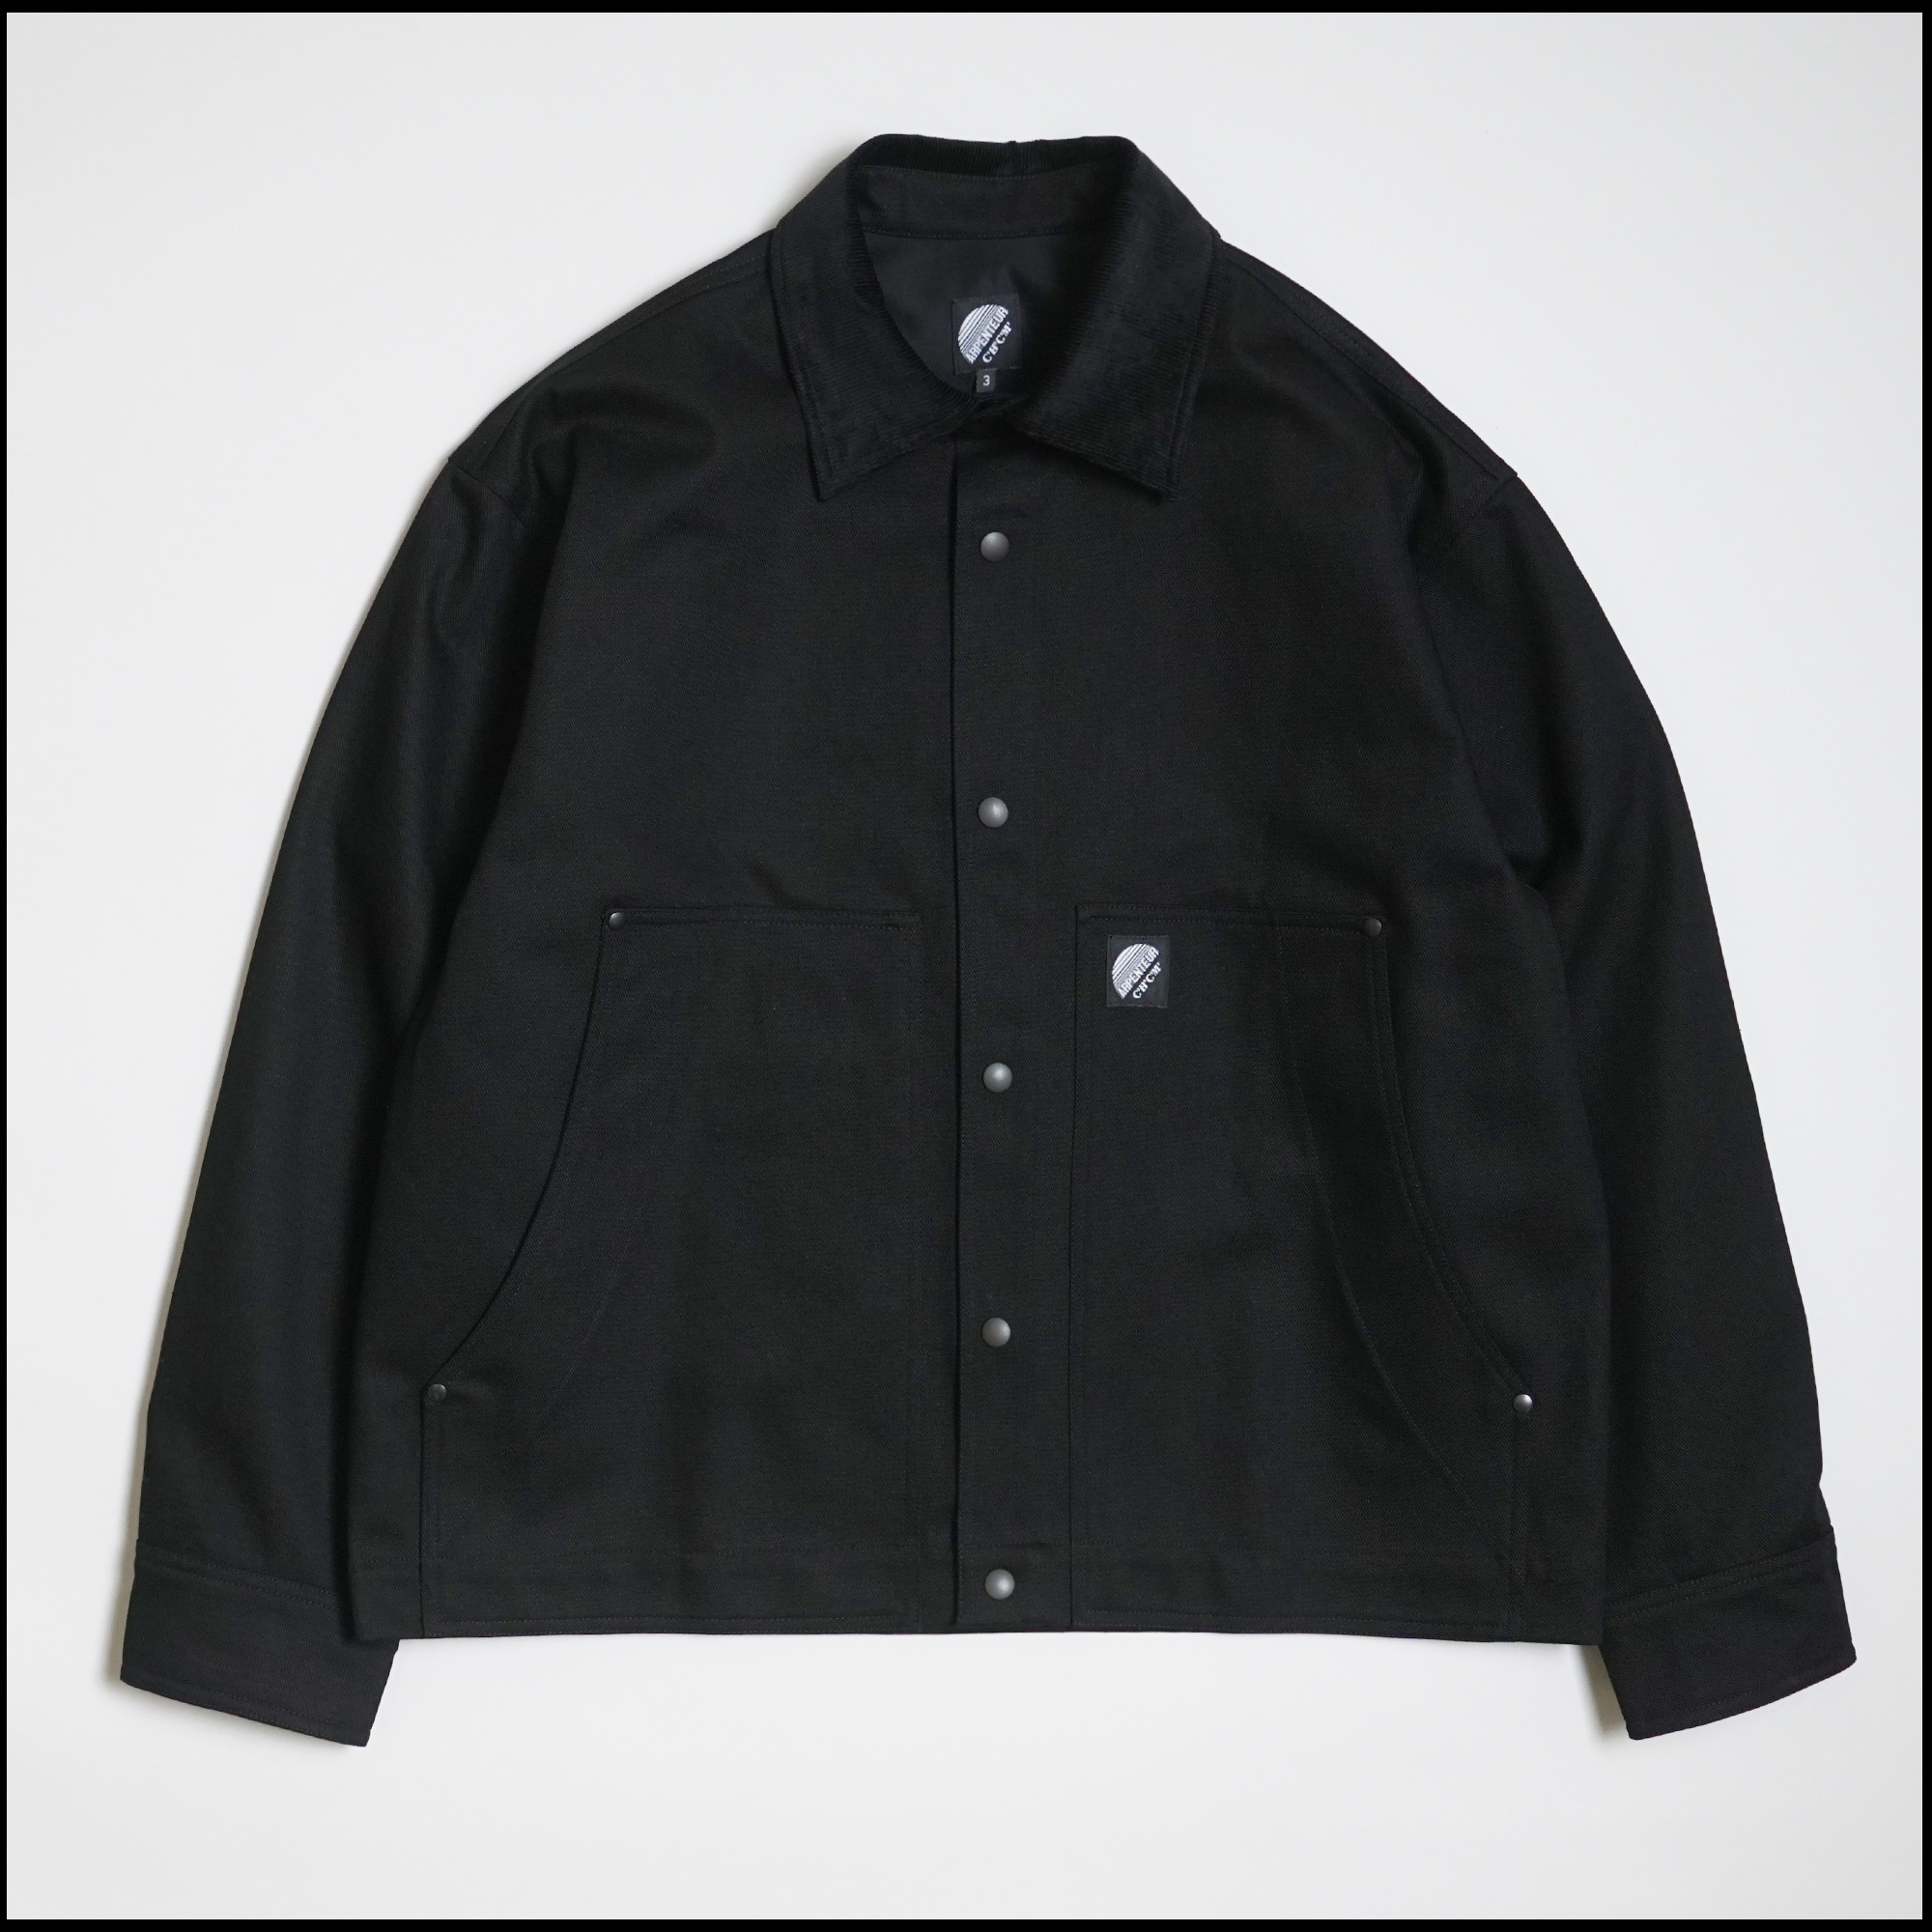 Day Jacket in Black color by Arpenteur for C’H’C’M’